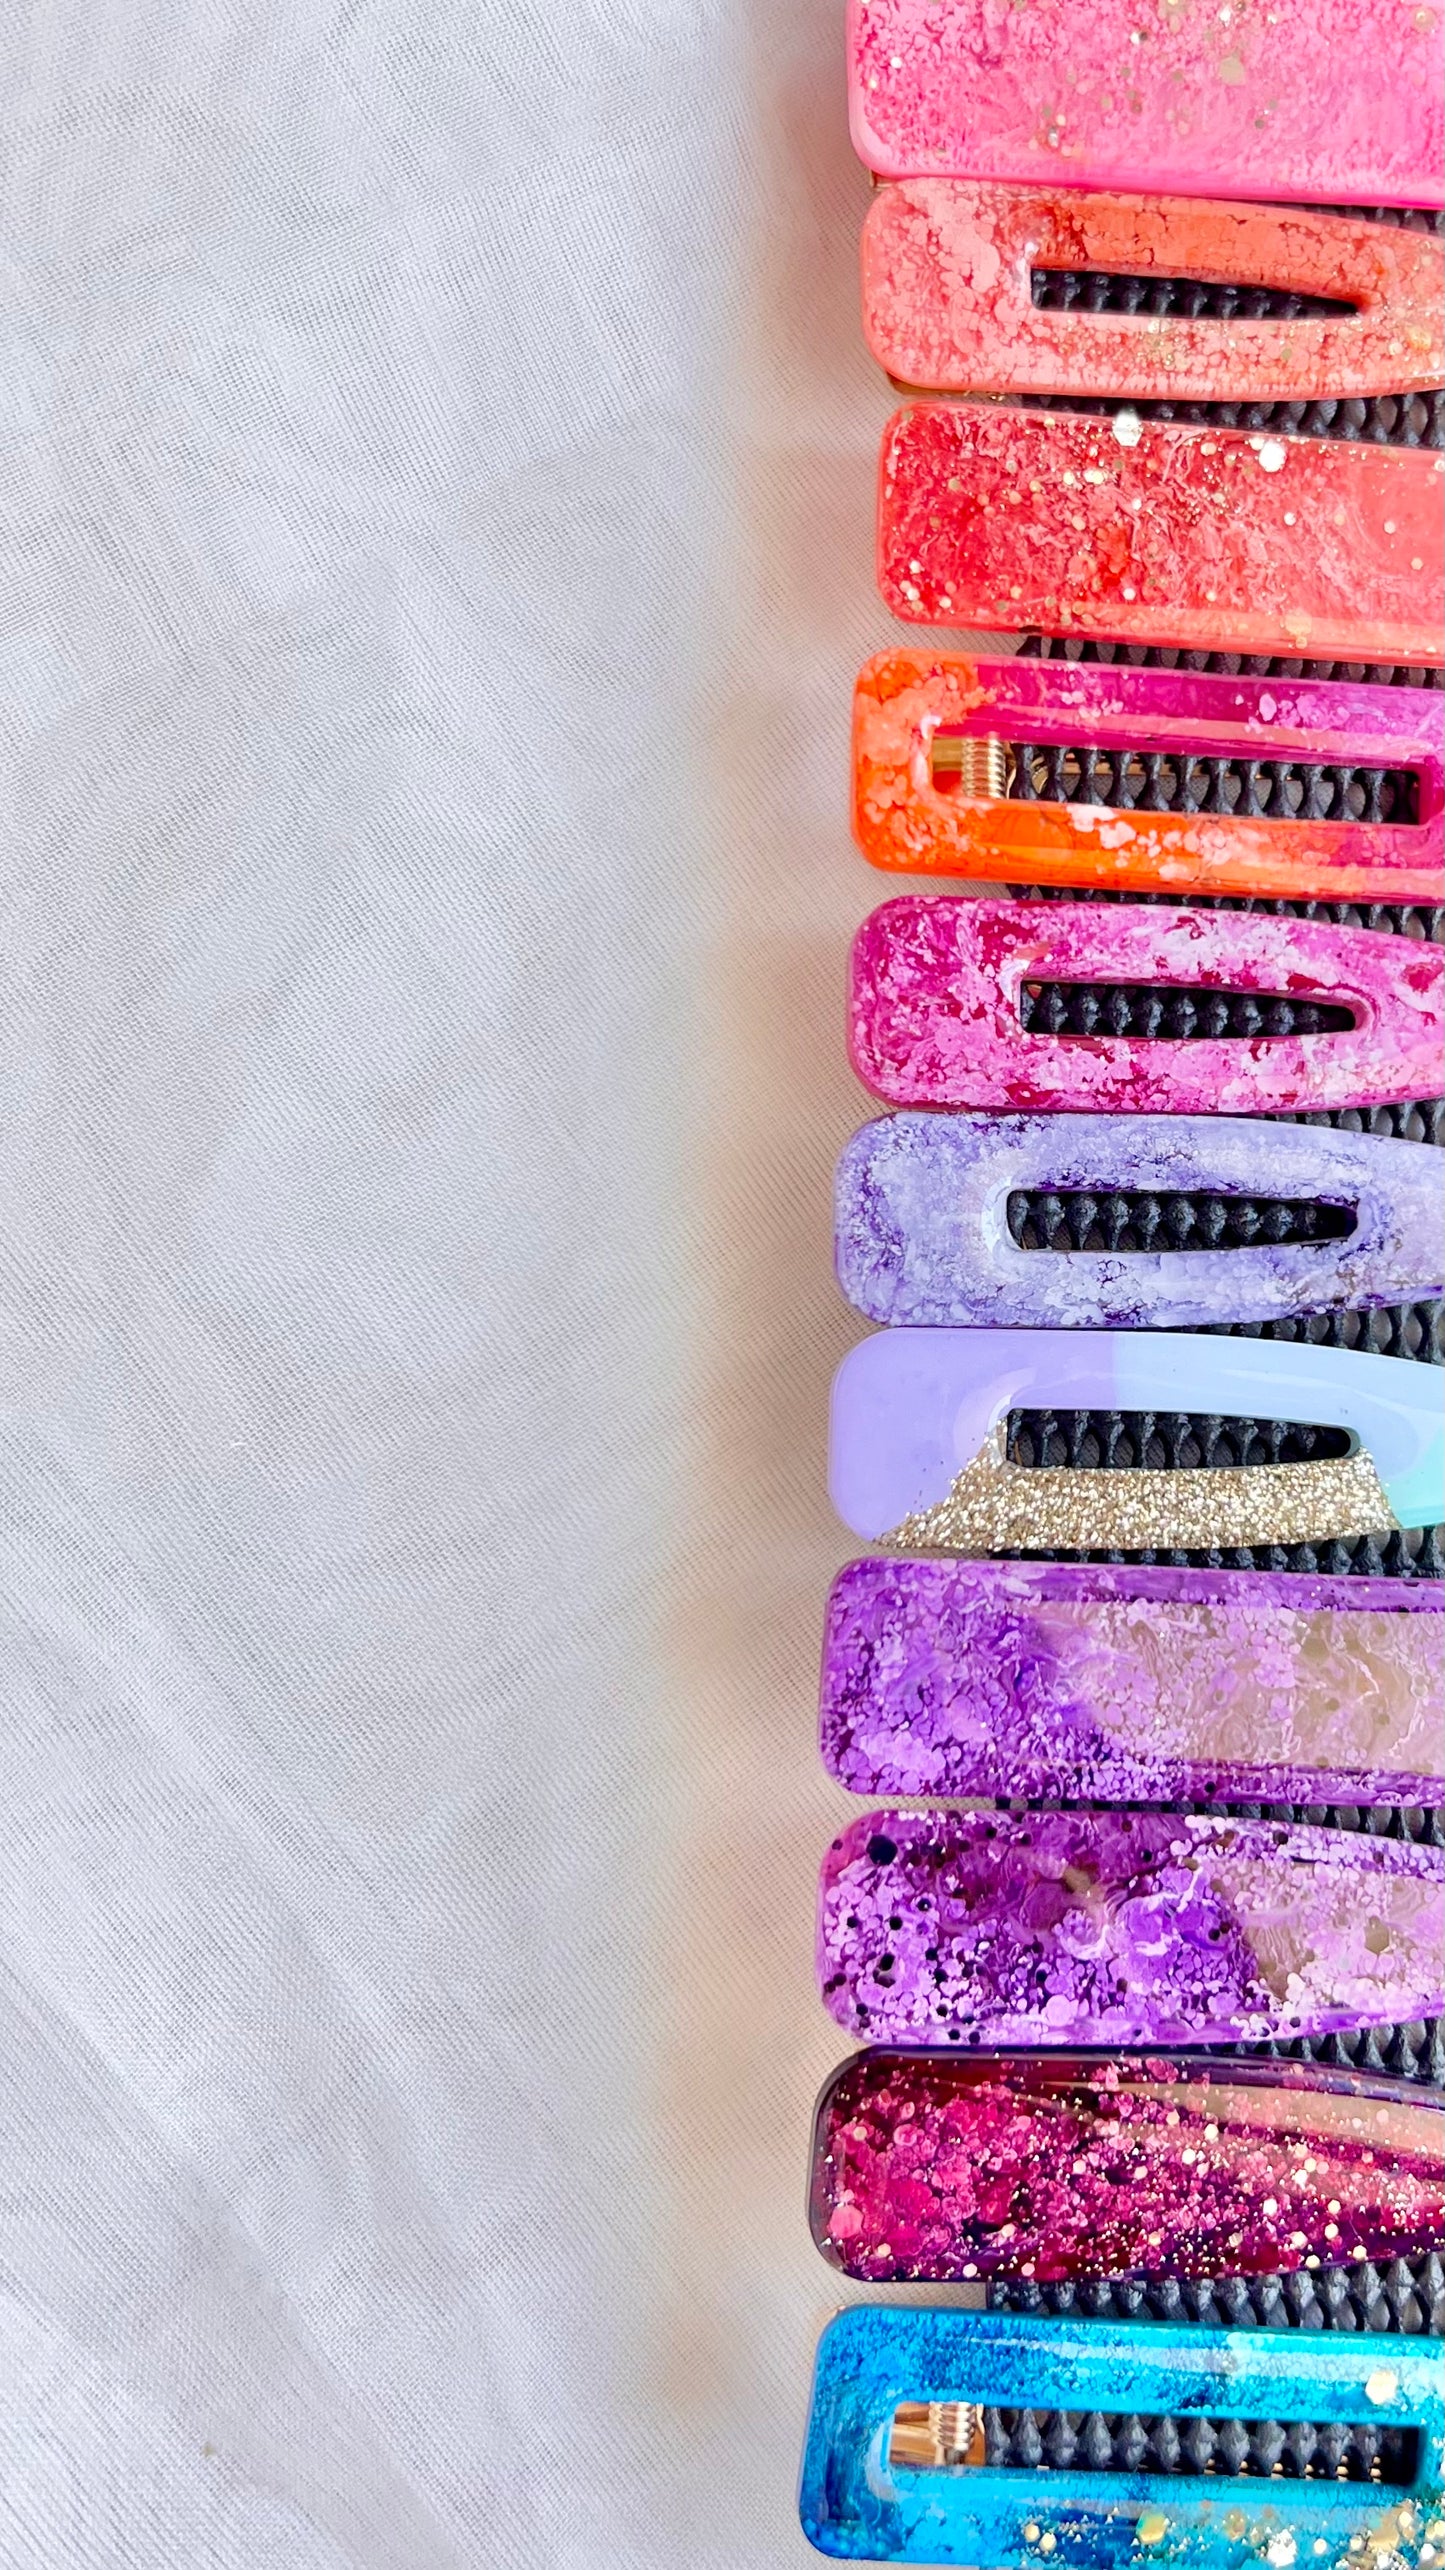 Sunny May Hair Clips: These hair slides are handmade from a delightful mix of colours and glitter, creating the perfect mix of vibrant colour and shine to brighten up your outfit
These go - Ciao Bella Dresses 